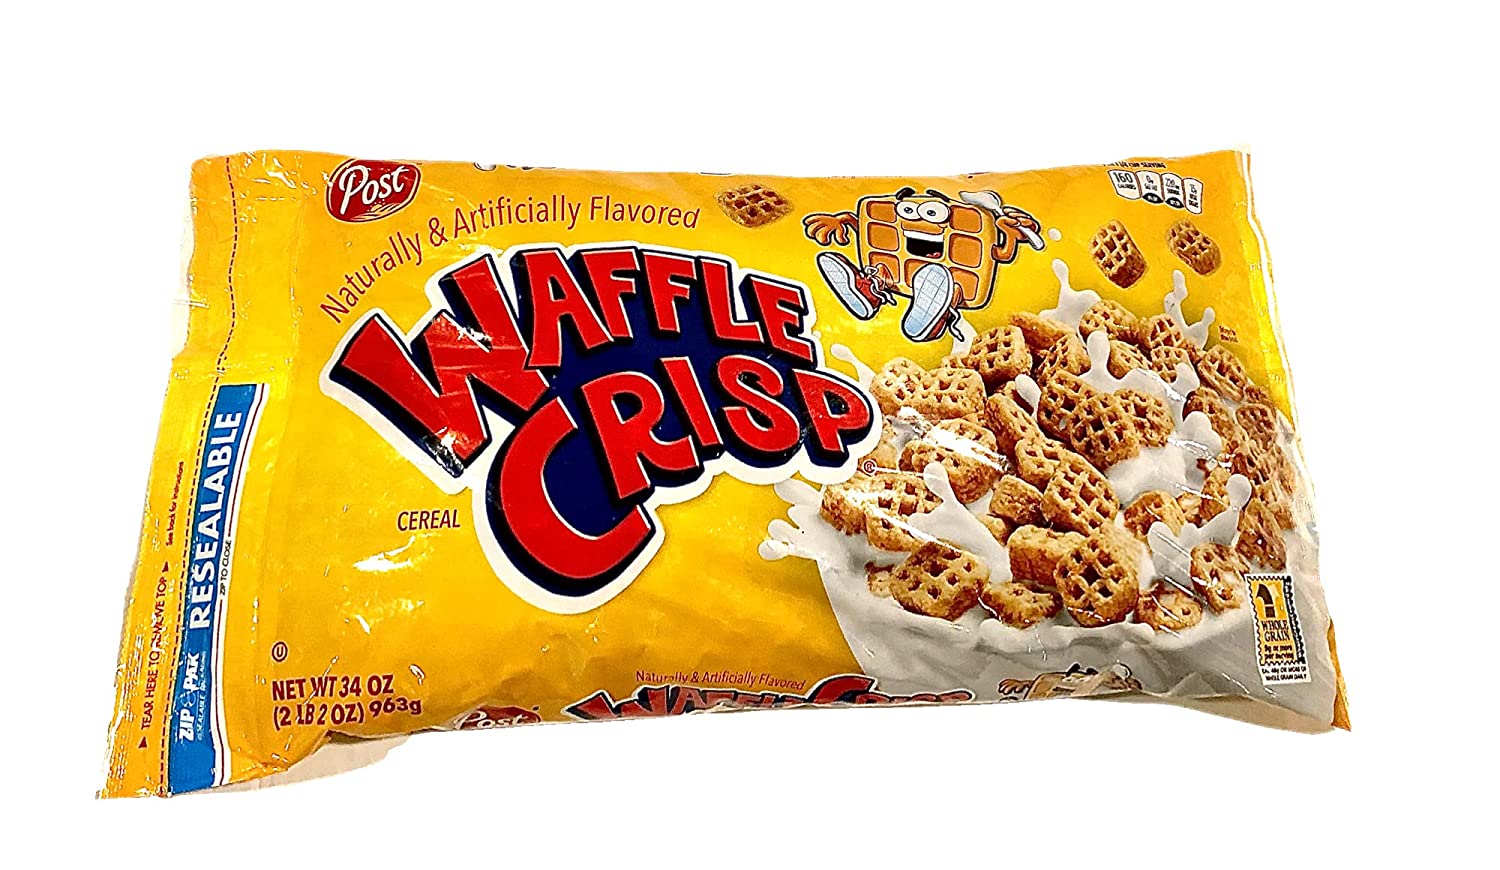 Discontinued Foods - post waffle crisp cereal - Post Naturally & Artificially Flavored Vapple Cereal Zip Pat Resealable Tear Here To Mene Top Crue Green Um Naturally & Artifically Flavored Uni Net Wt 34 Oz 2LB2 Oz 963g